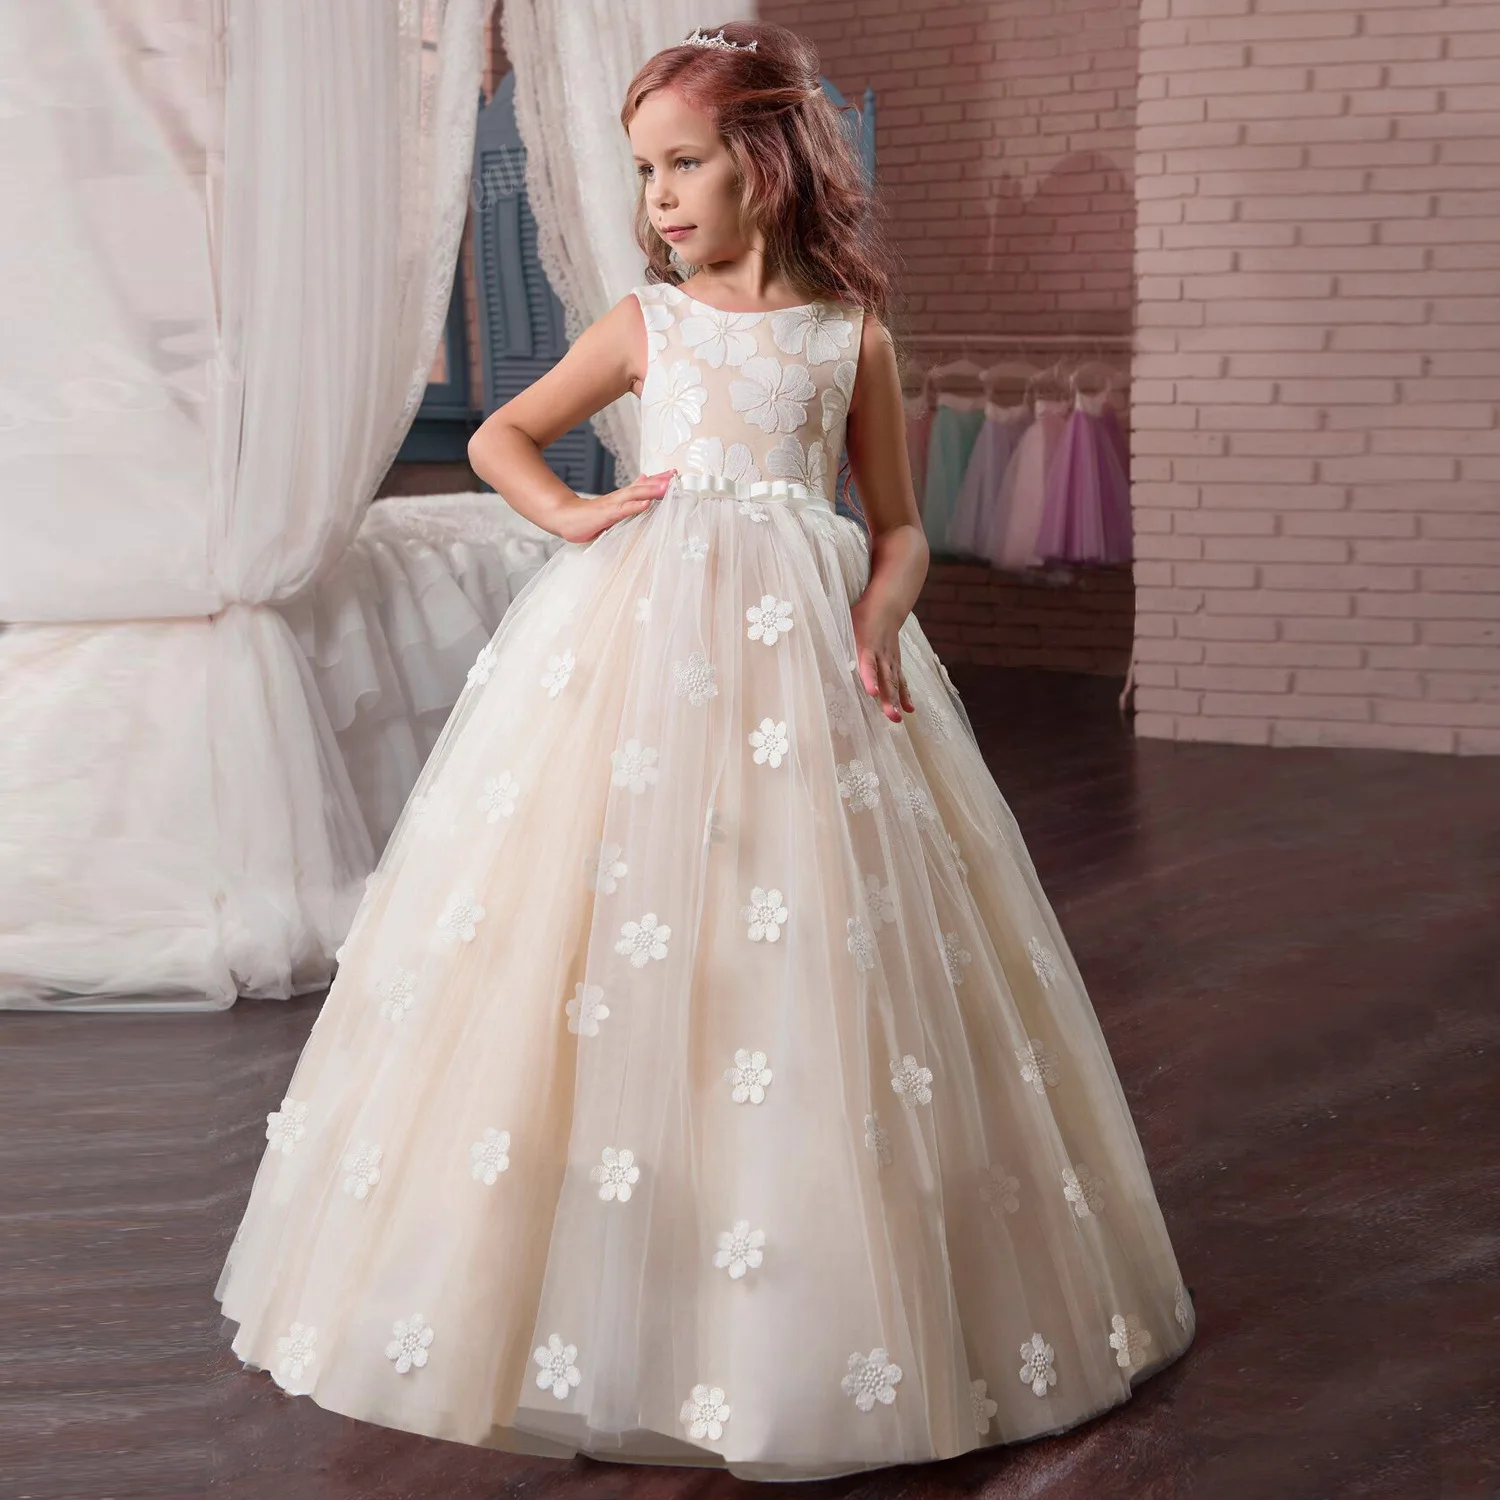 YMING Girls Wedding Party Princess Dress Lace Tutu Dress Tulle Maxi Ball Prom Gown 